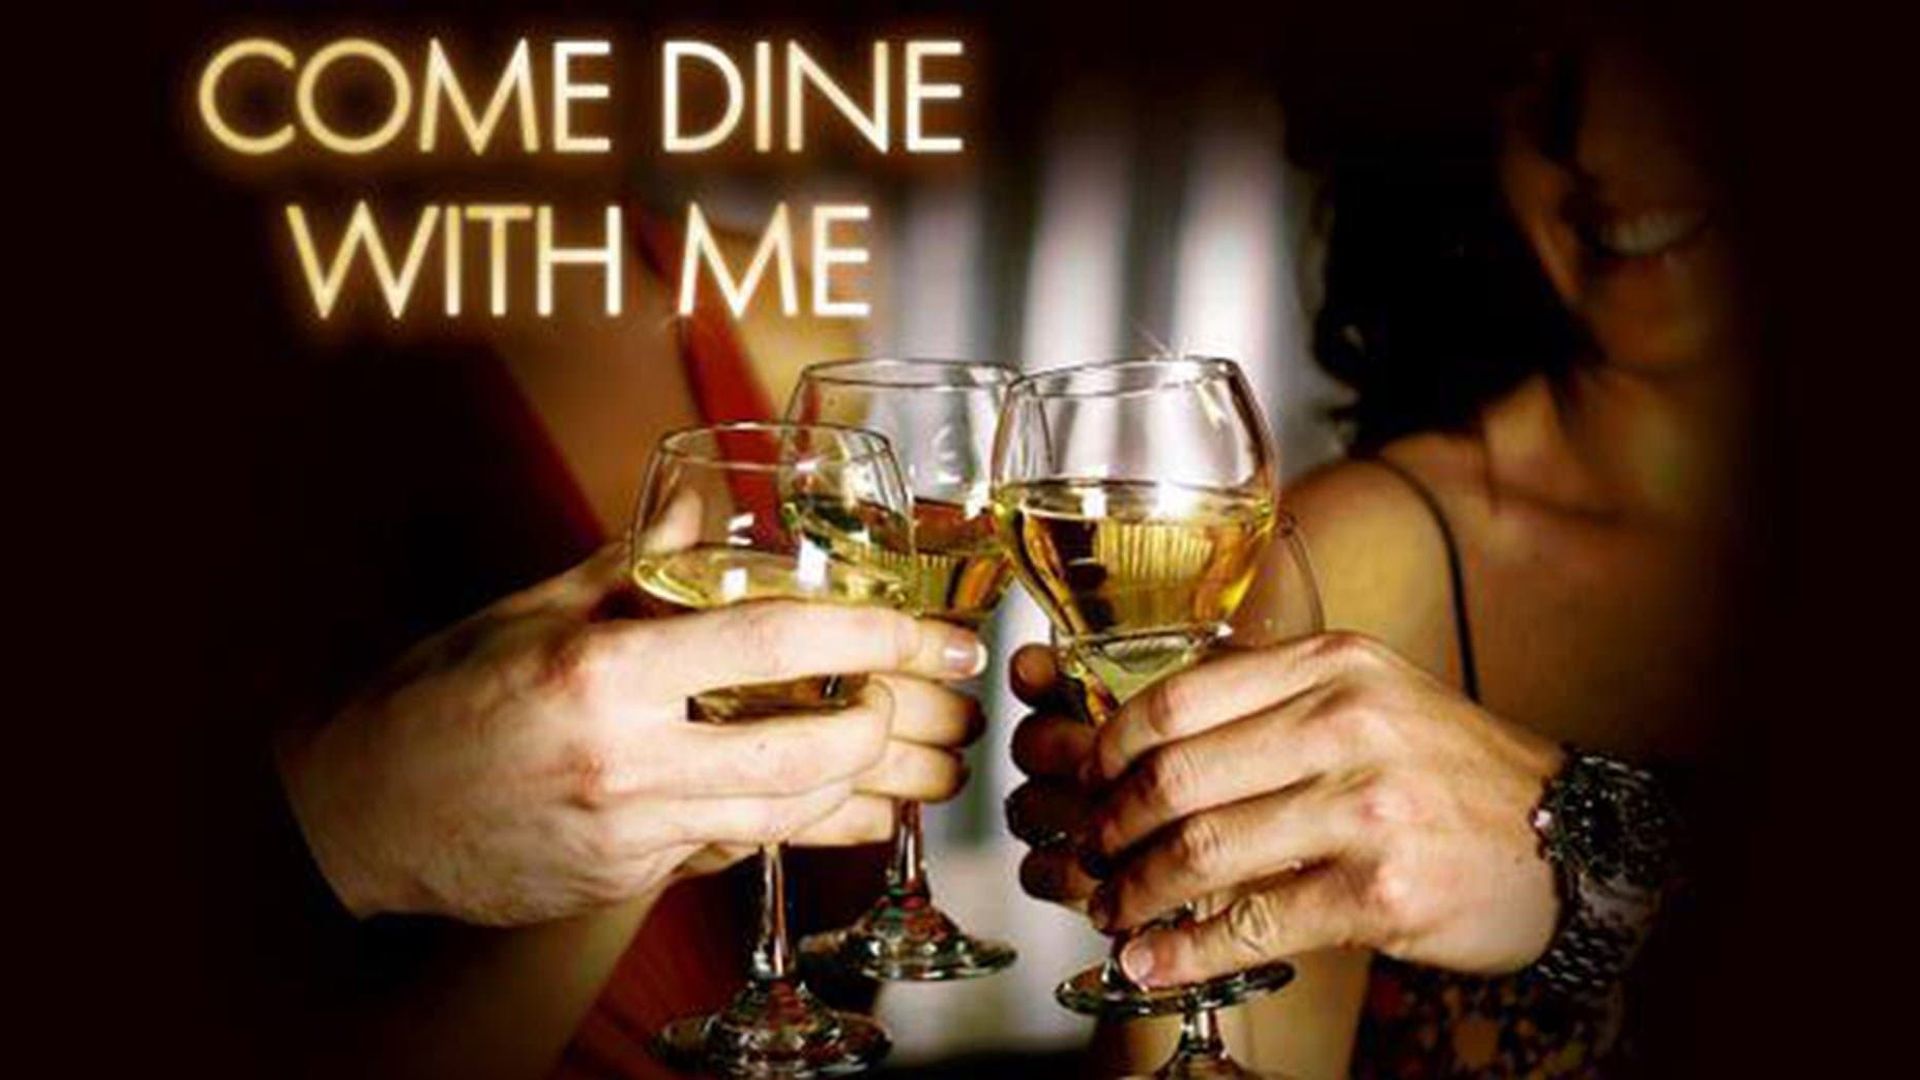 Come Dine with Me background